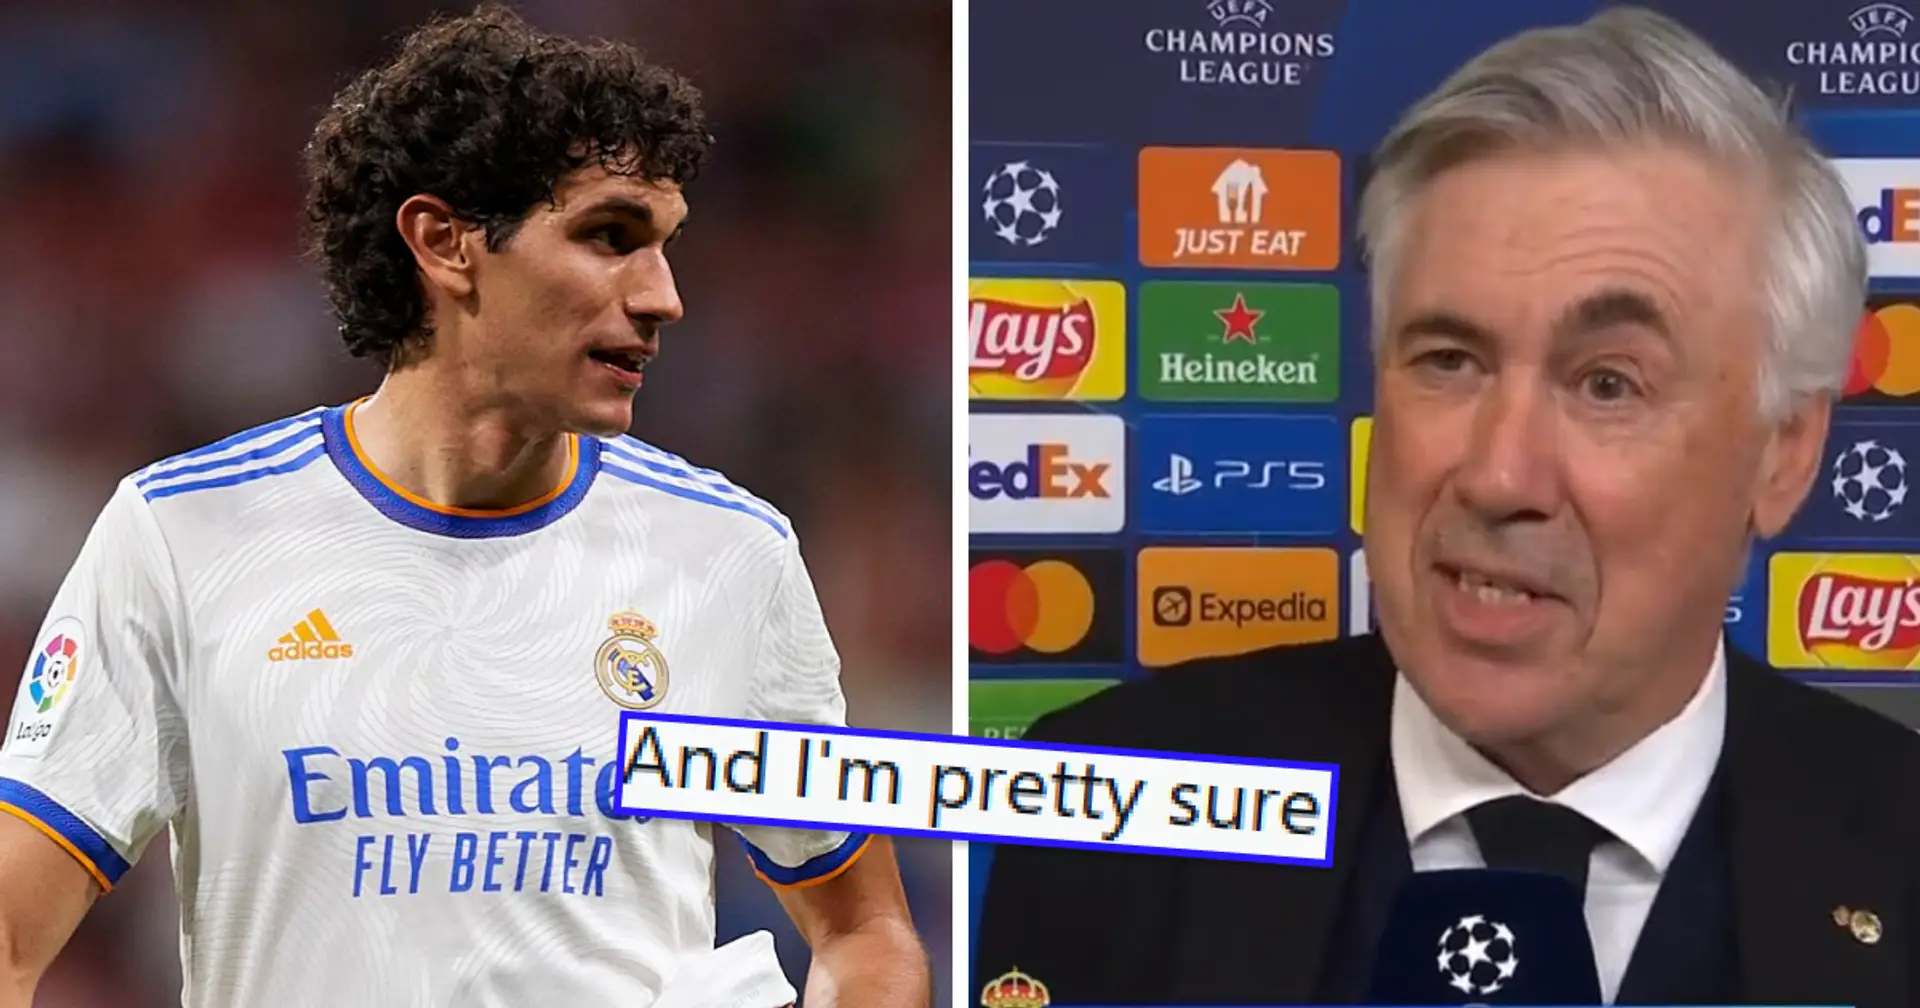 'I got my confirmation': Fan believes Vallejo rumour brings a new striker to Real Madrid